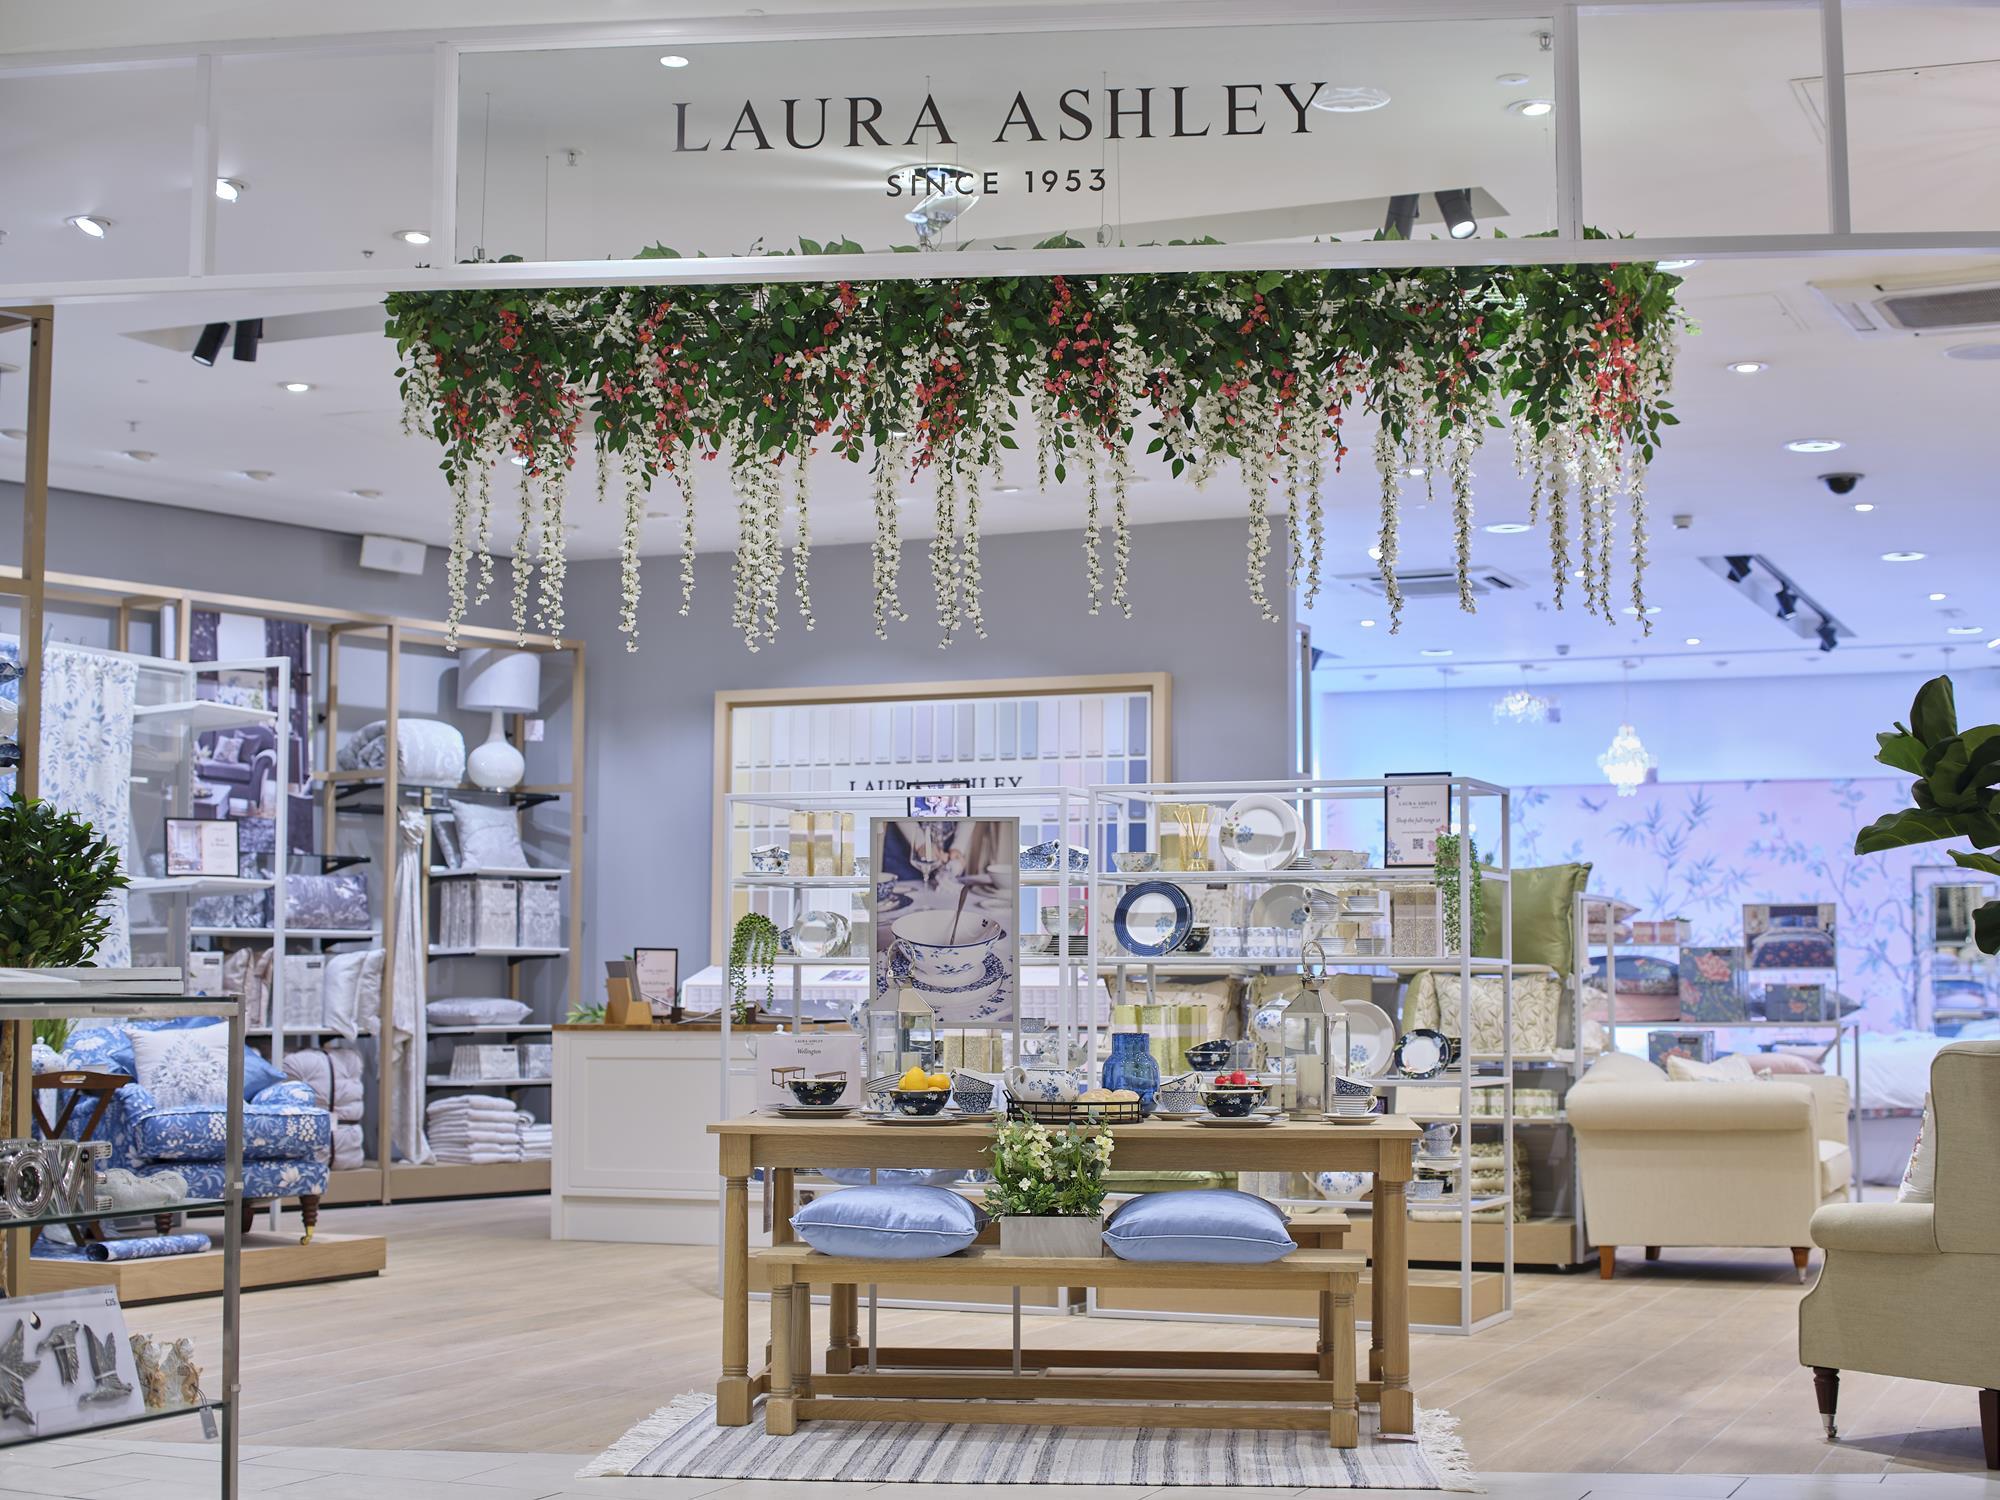 In pictures: Laura Ashley relaunches as shop-in-shop in Next, Gallery